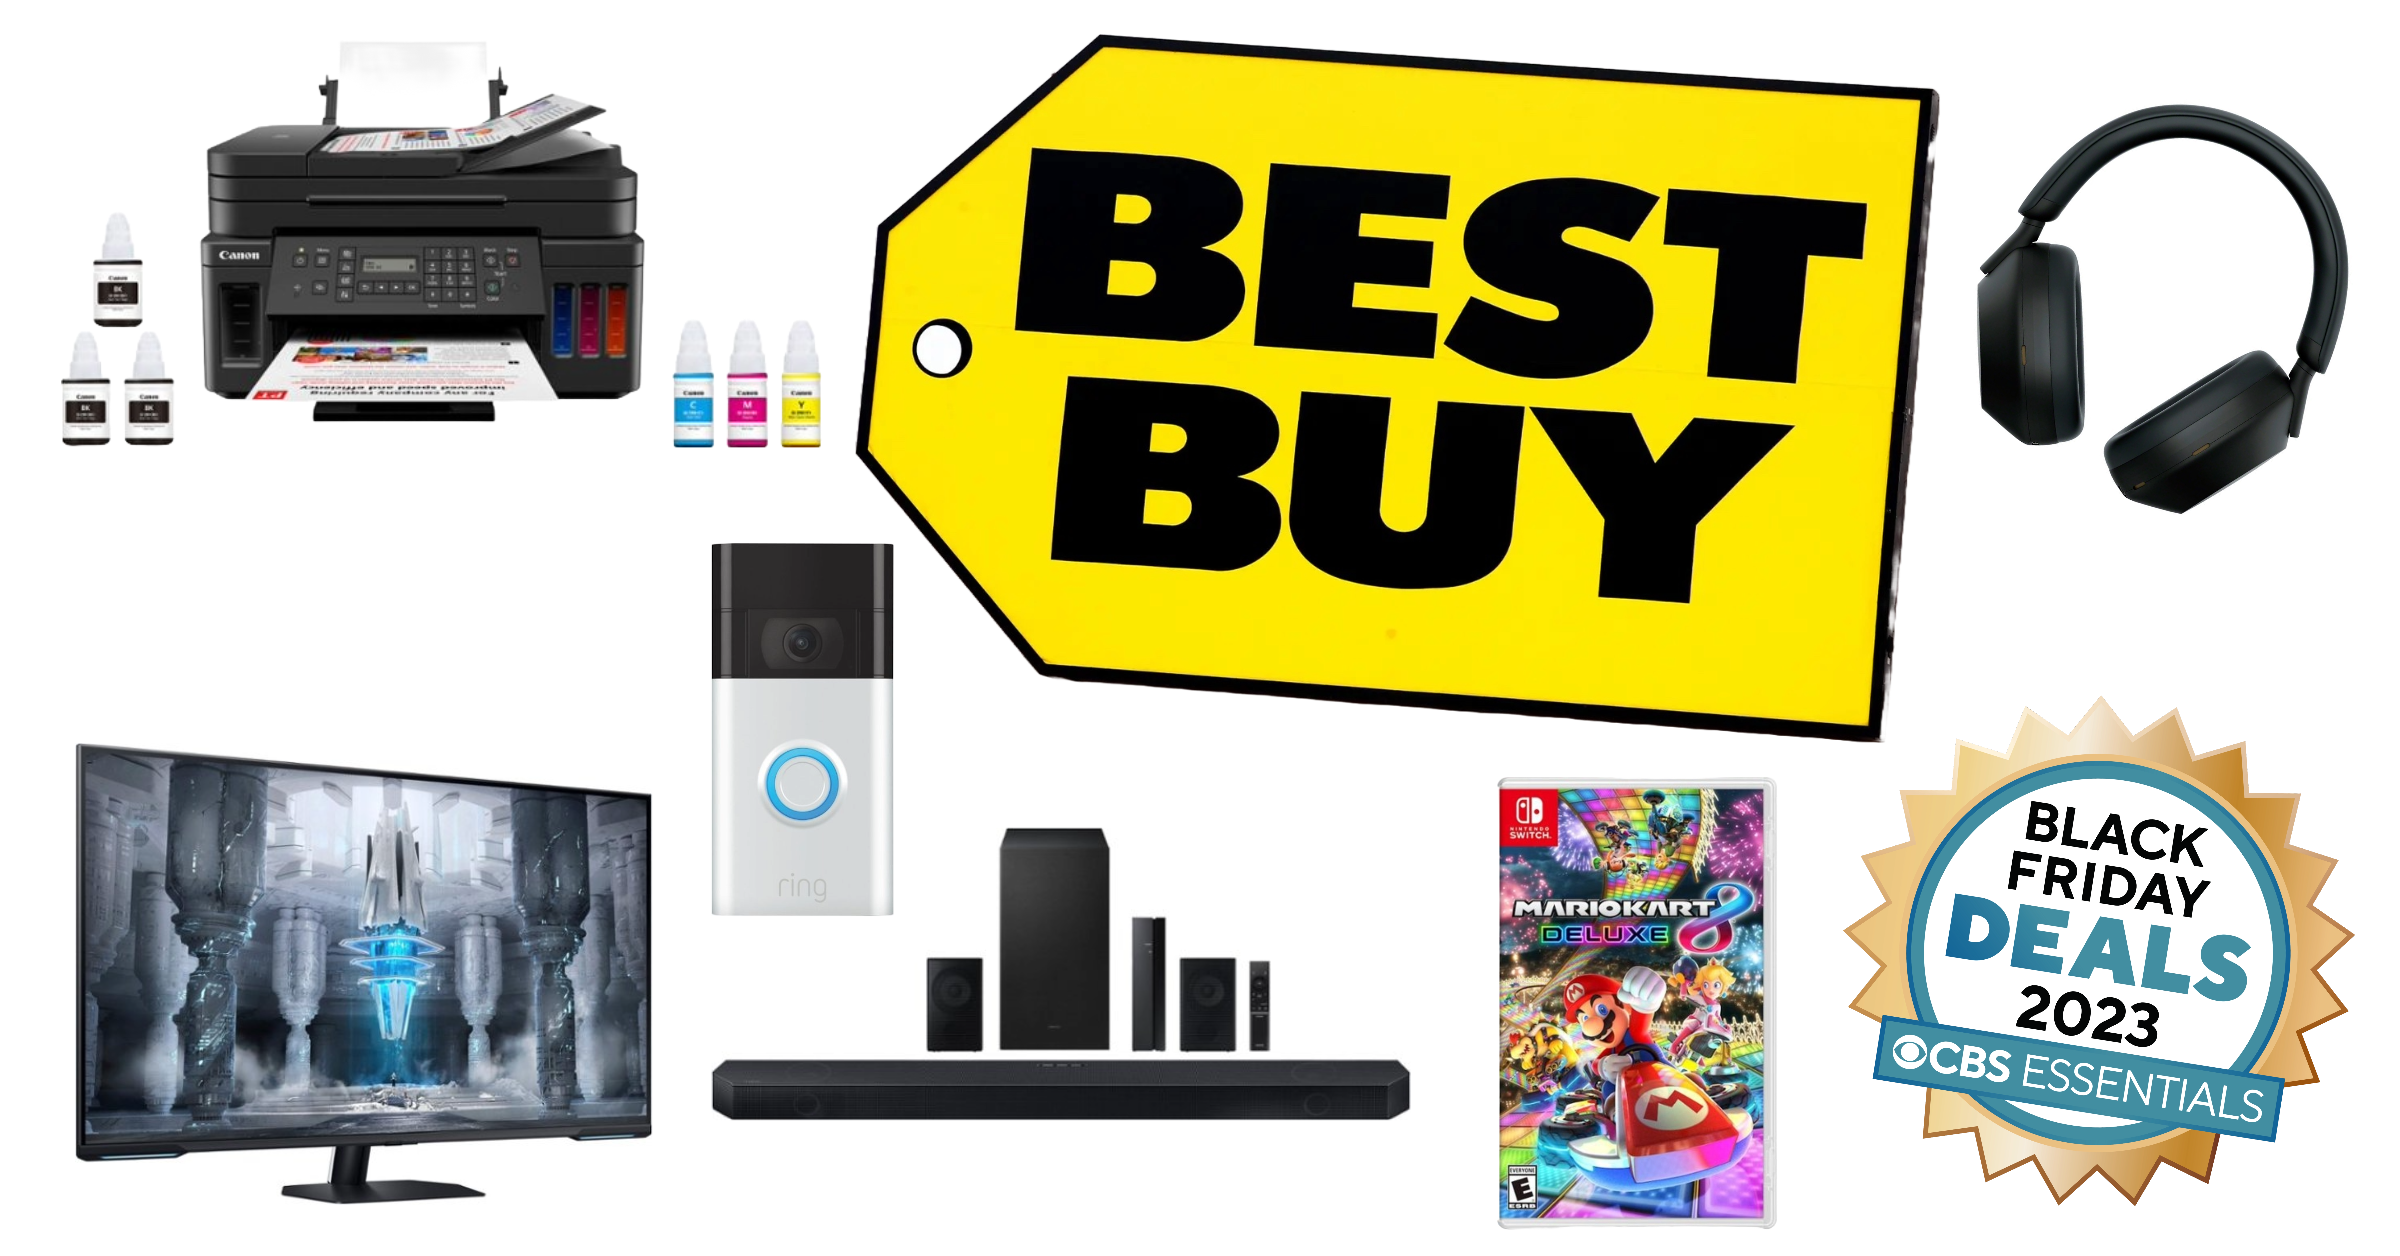 Black Friday 2023 - Deals on Gaming PCs, PC Components, Tech & More!